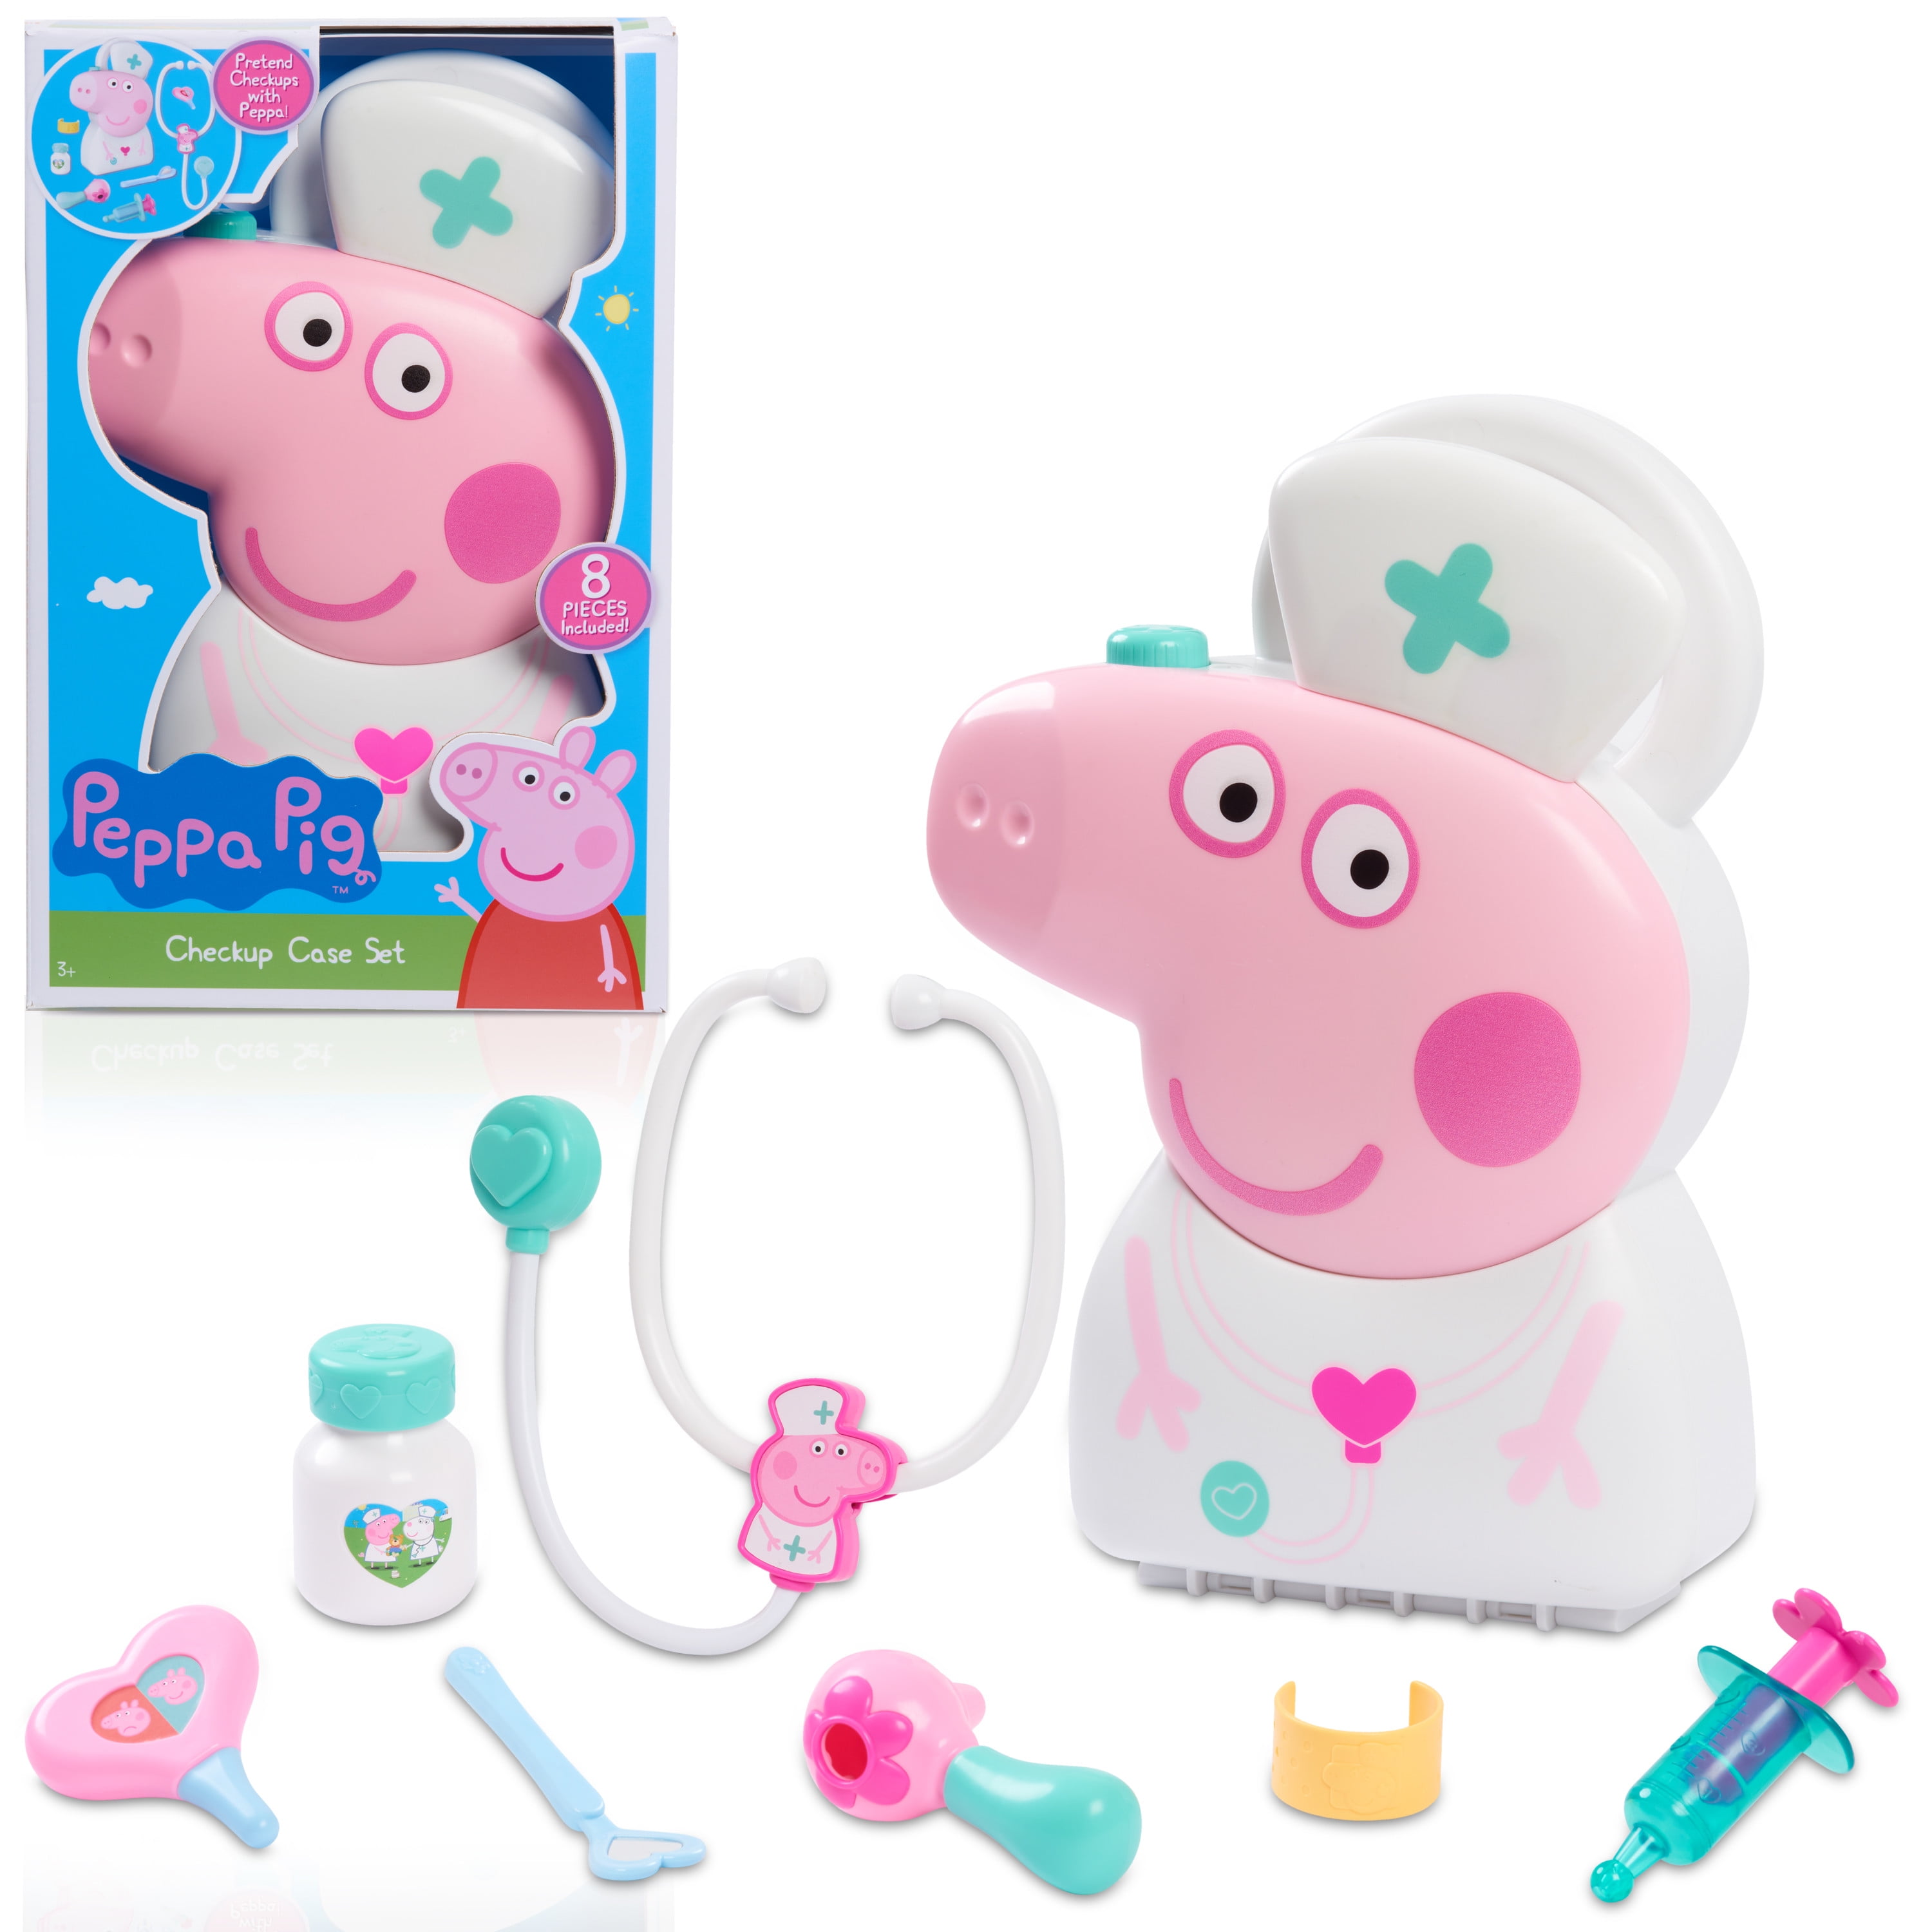 Peppa Pig Checkup Case Set with Carry Handle, 8-Piece Doctor Kit for Kids with Stethoscope,  Kids Toys for Ages 3 Up, Gifts and Presents